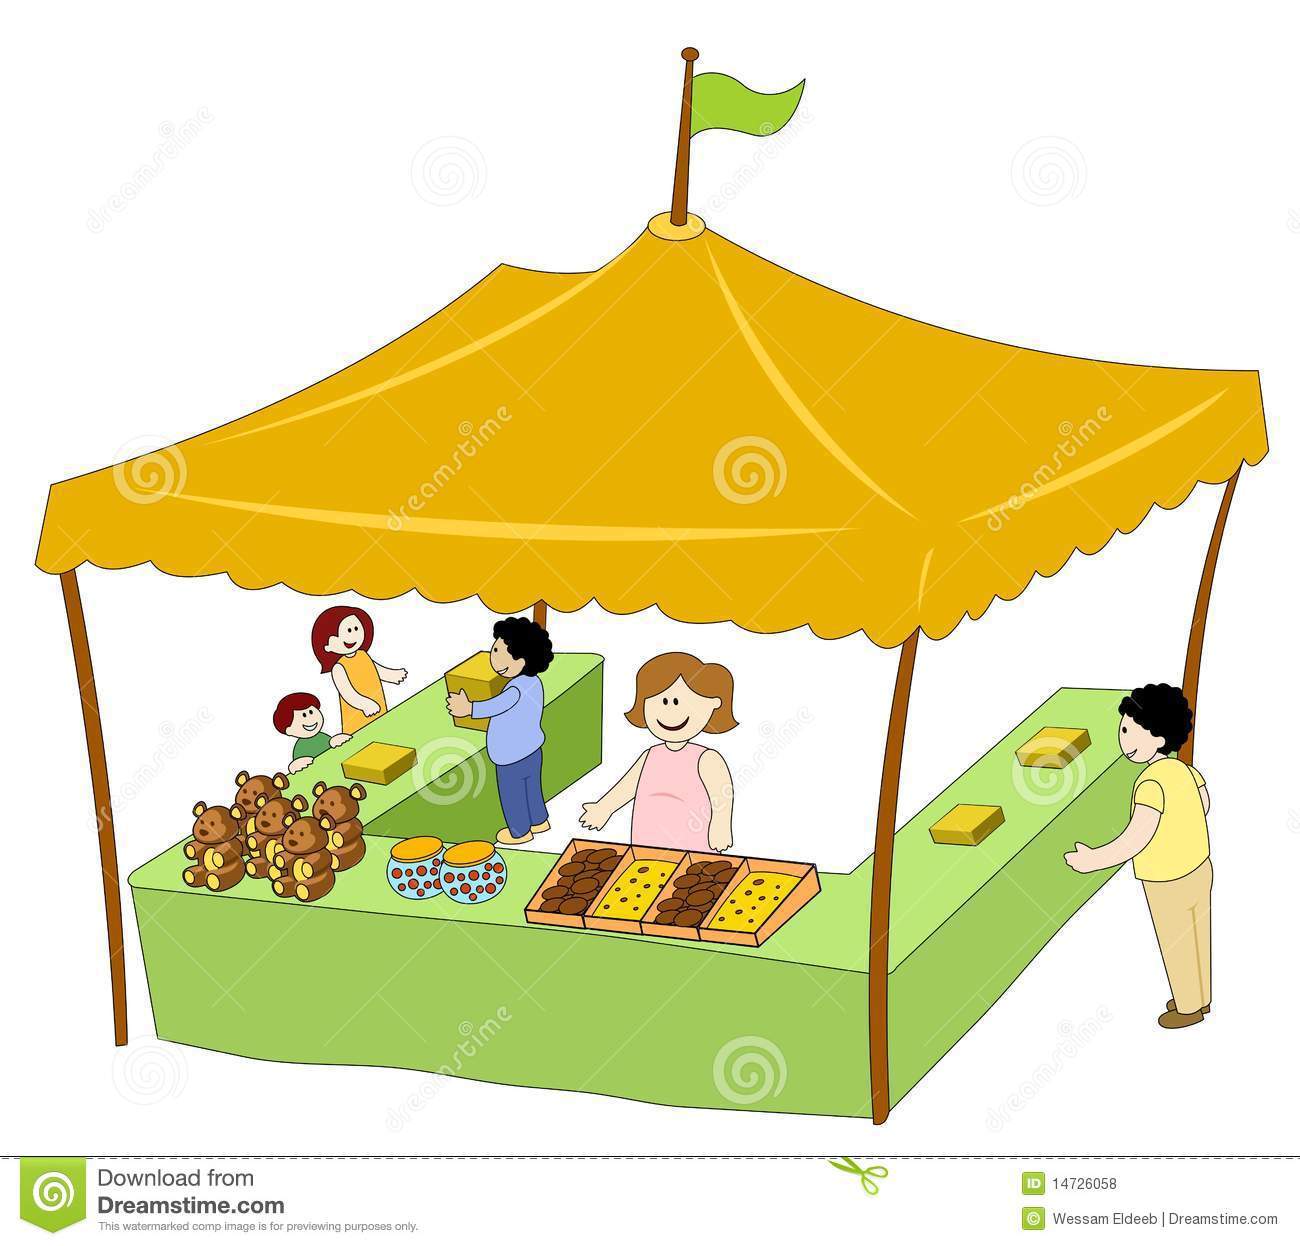     Party Tent Clipart Displaying 18 Good Pix For Party Tent Clipart